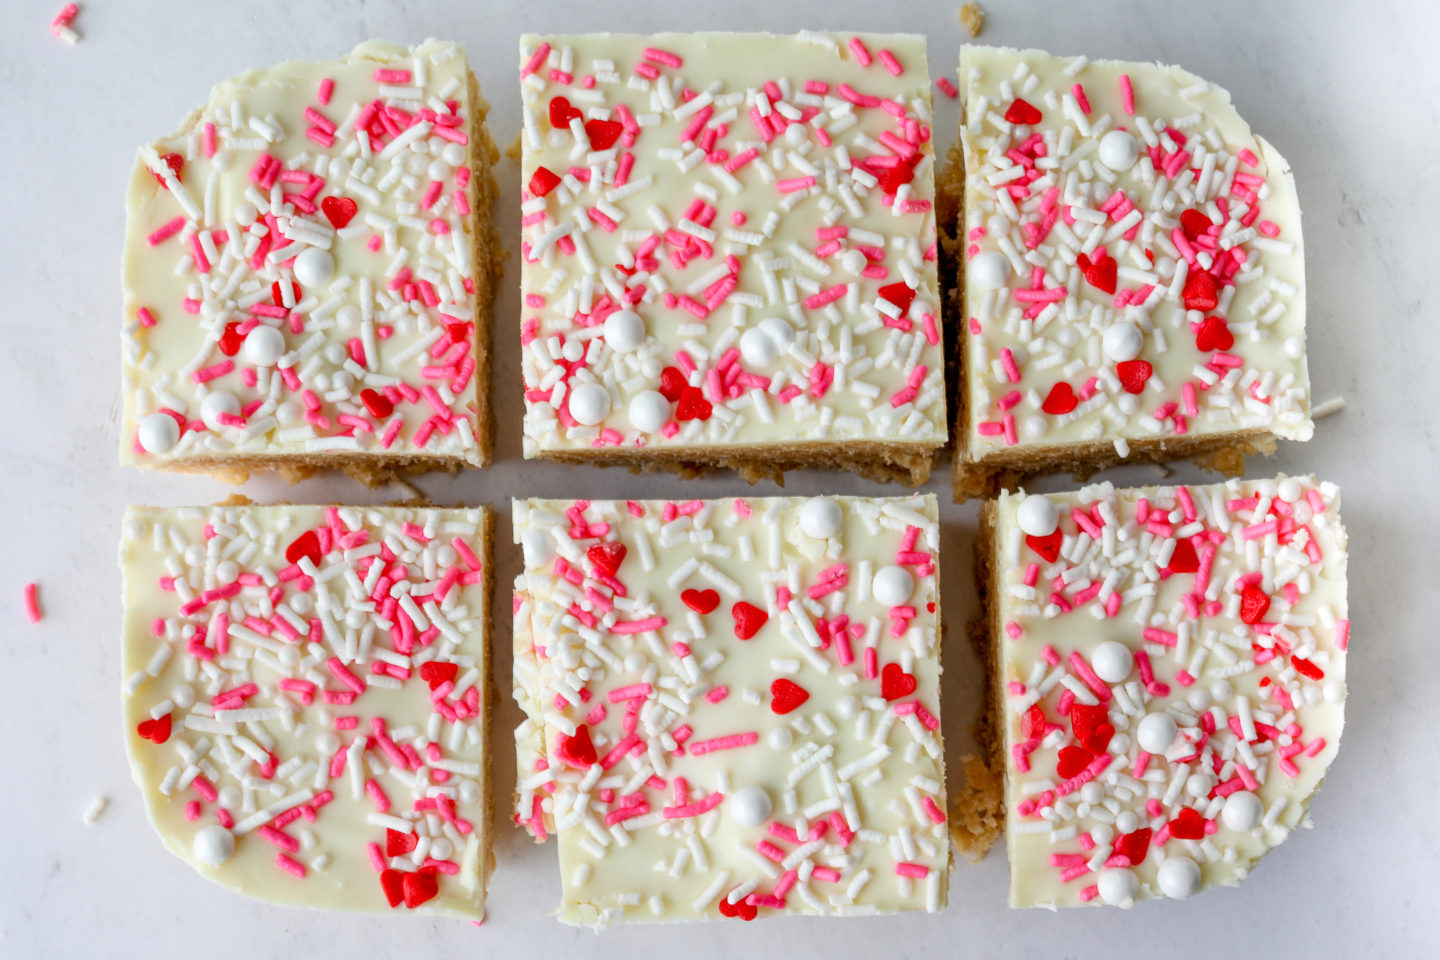 Valentine's Cereal Bar Image From The Top Showing 6 Bars with Sprinkles on Top.